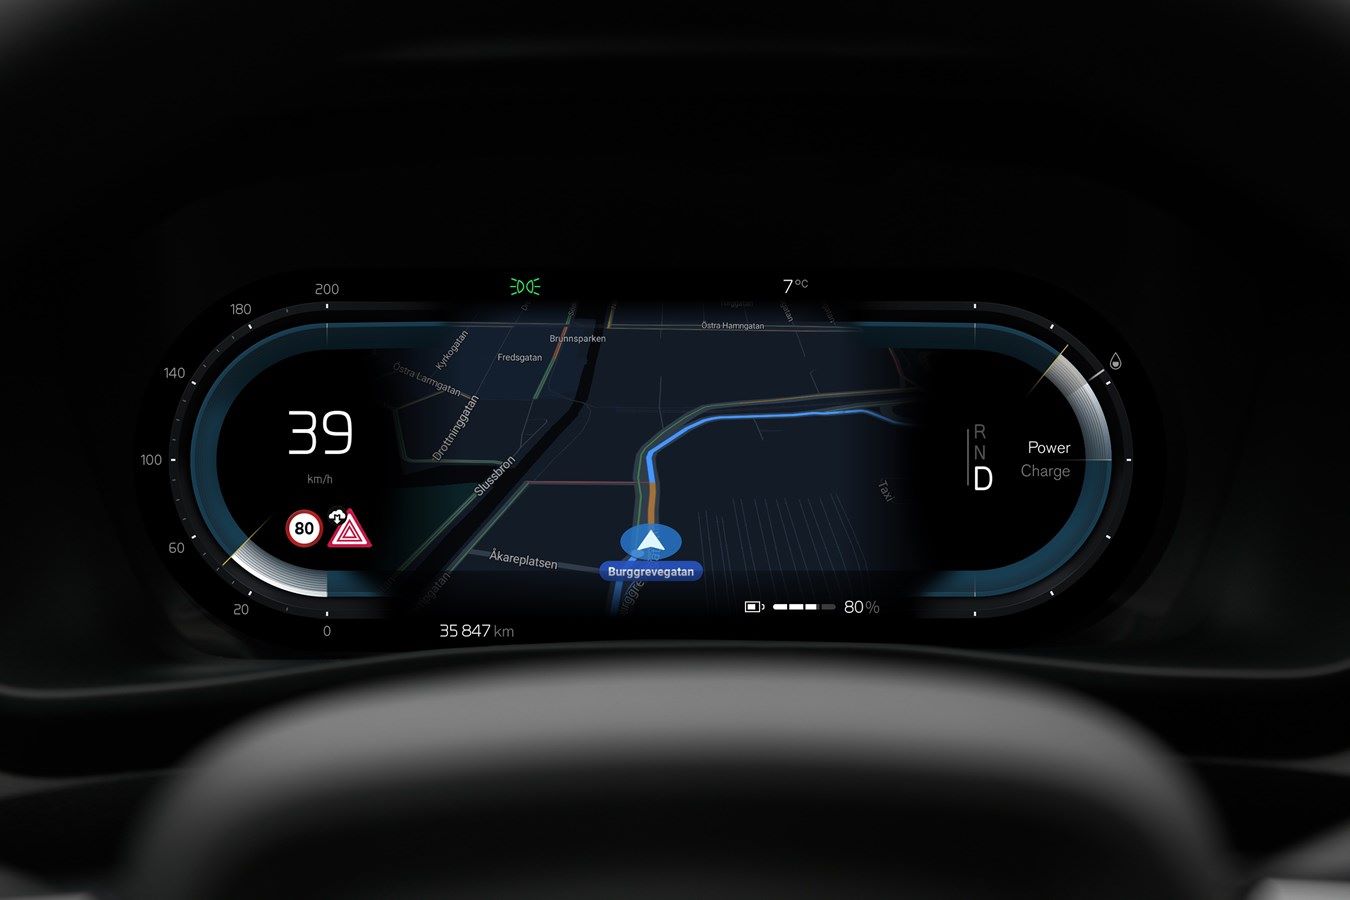 Volvo Cars’ Industry-First Connected Safety Technology Can Now Alert Drivers of Accidents Ahead